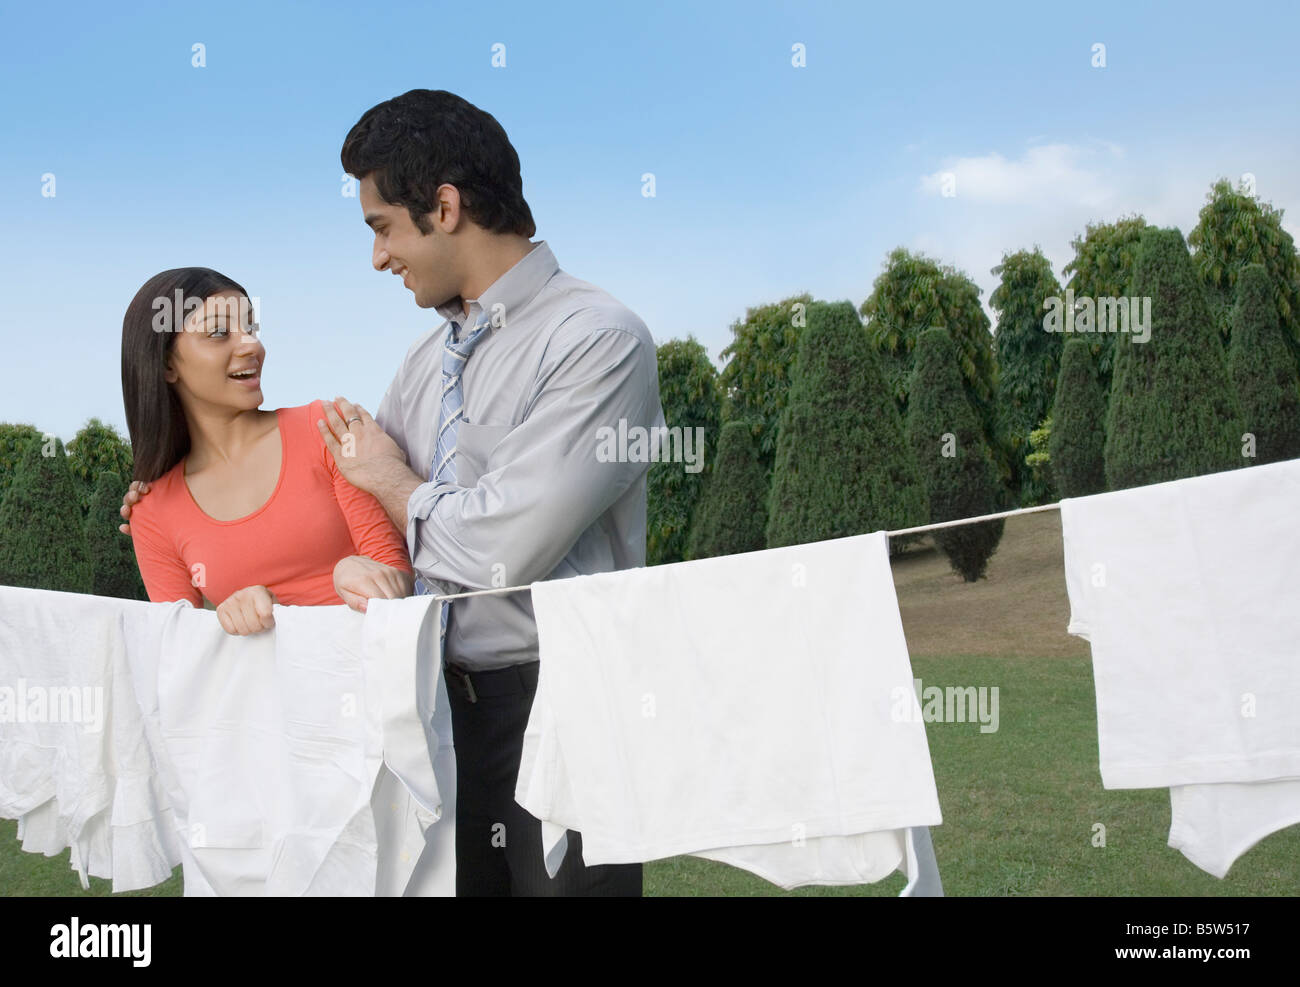 Couple looking at each other and smiling Stock Photo